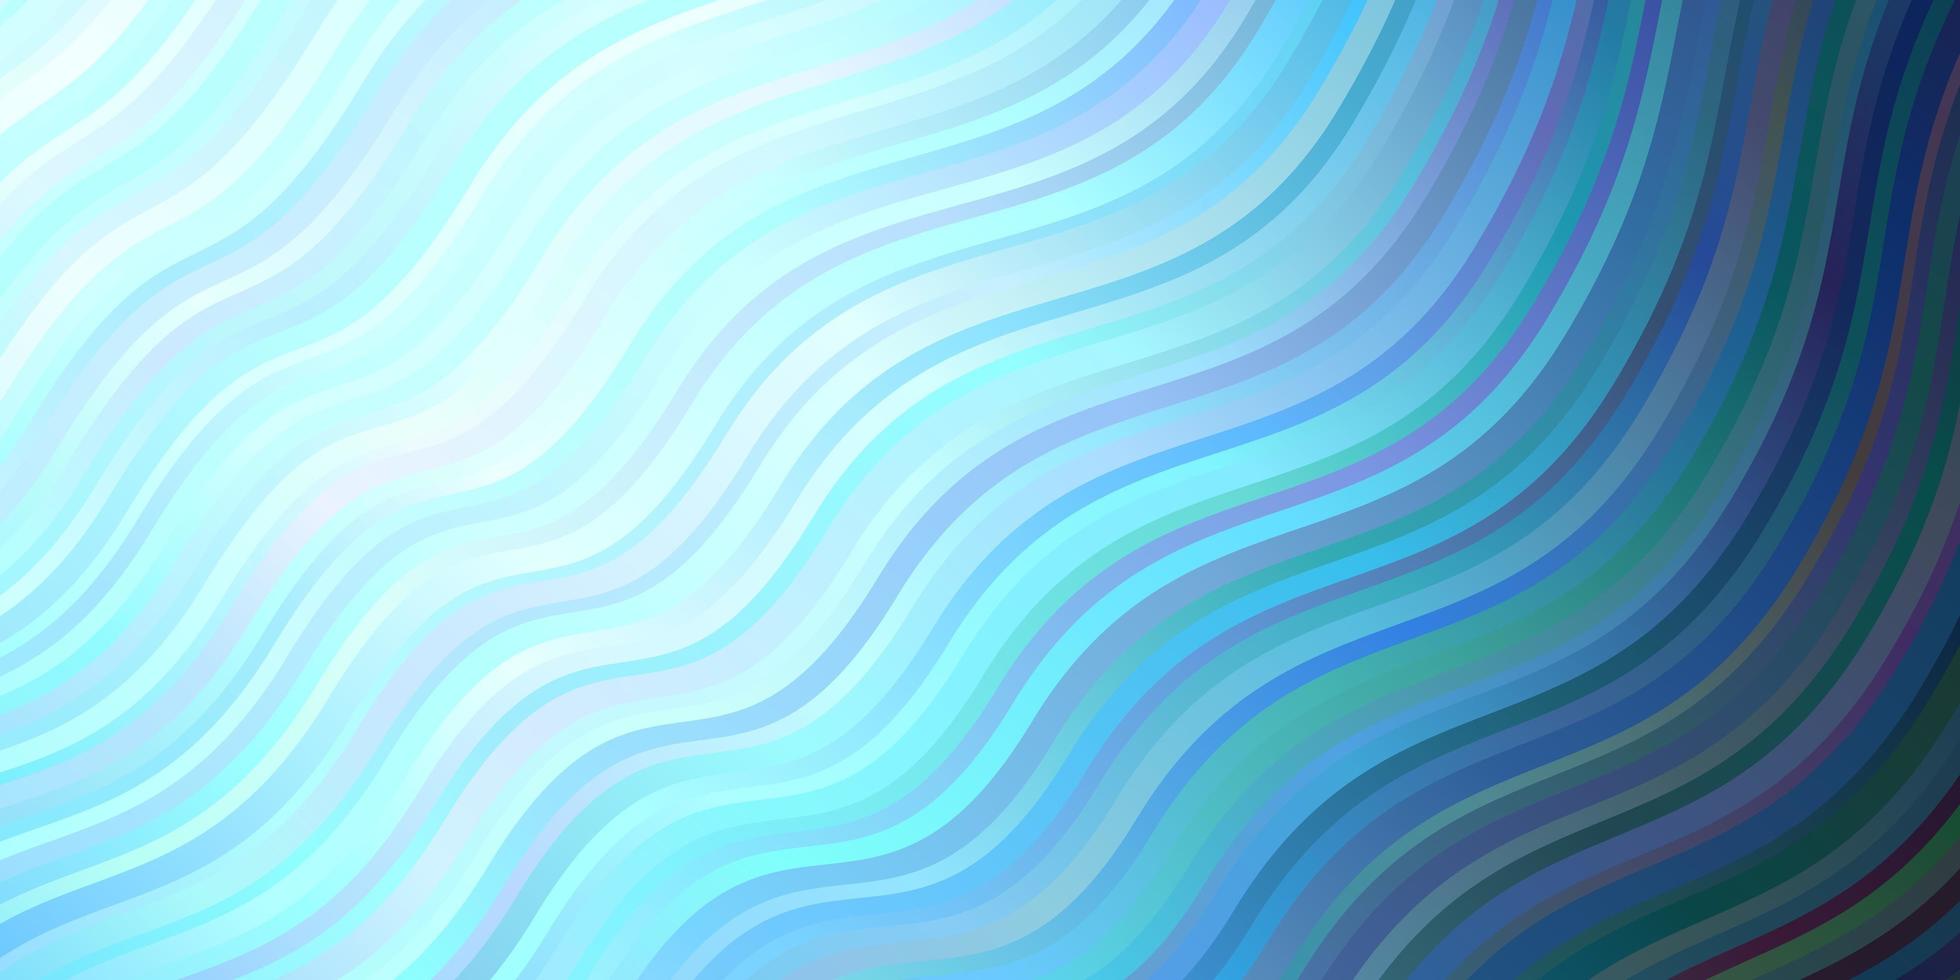 Light BLUE vector background with lines